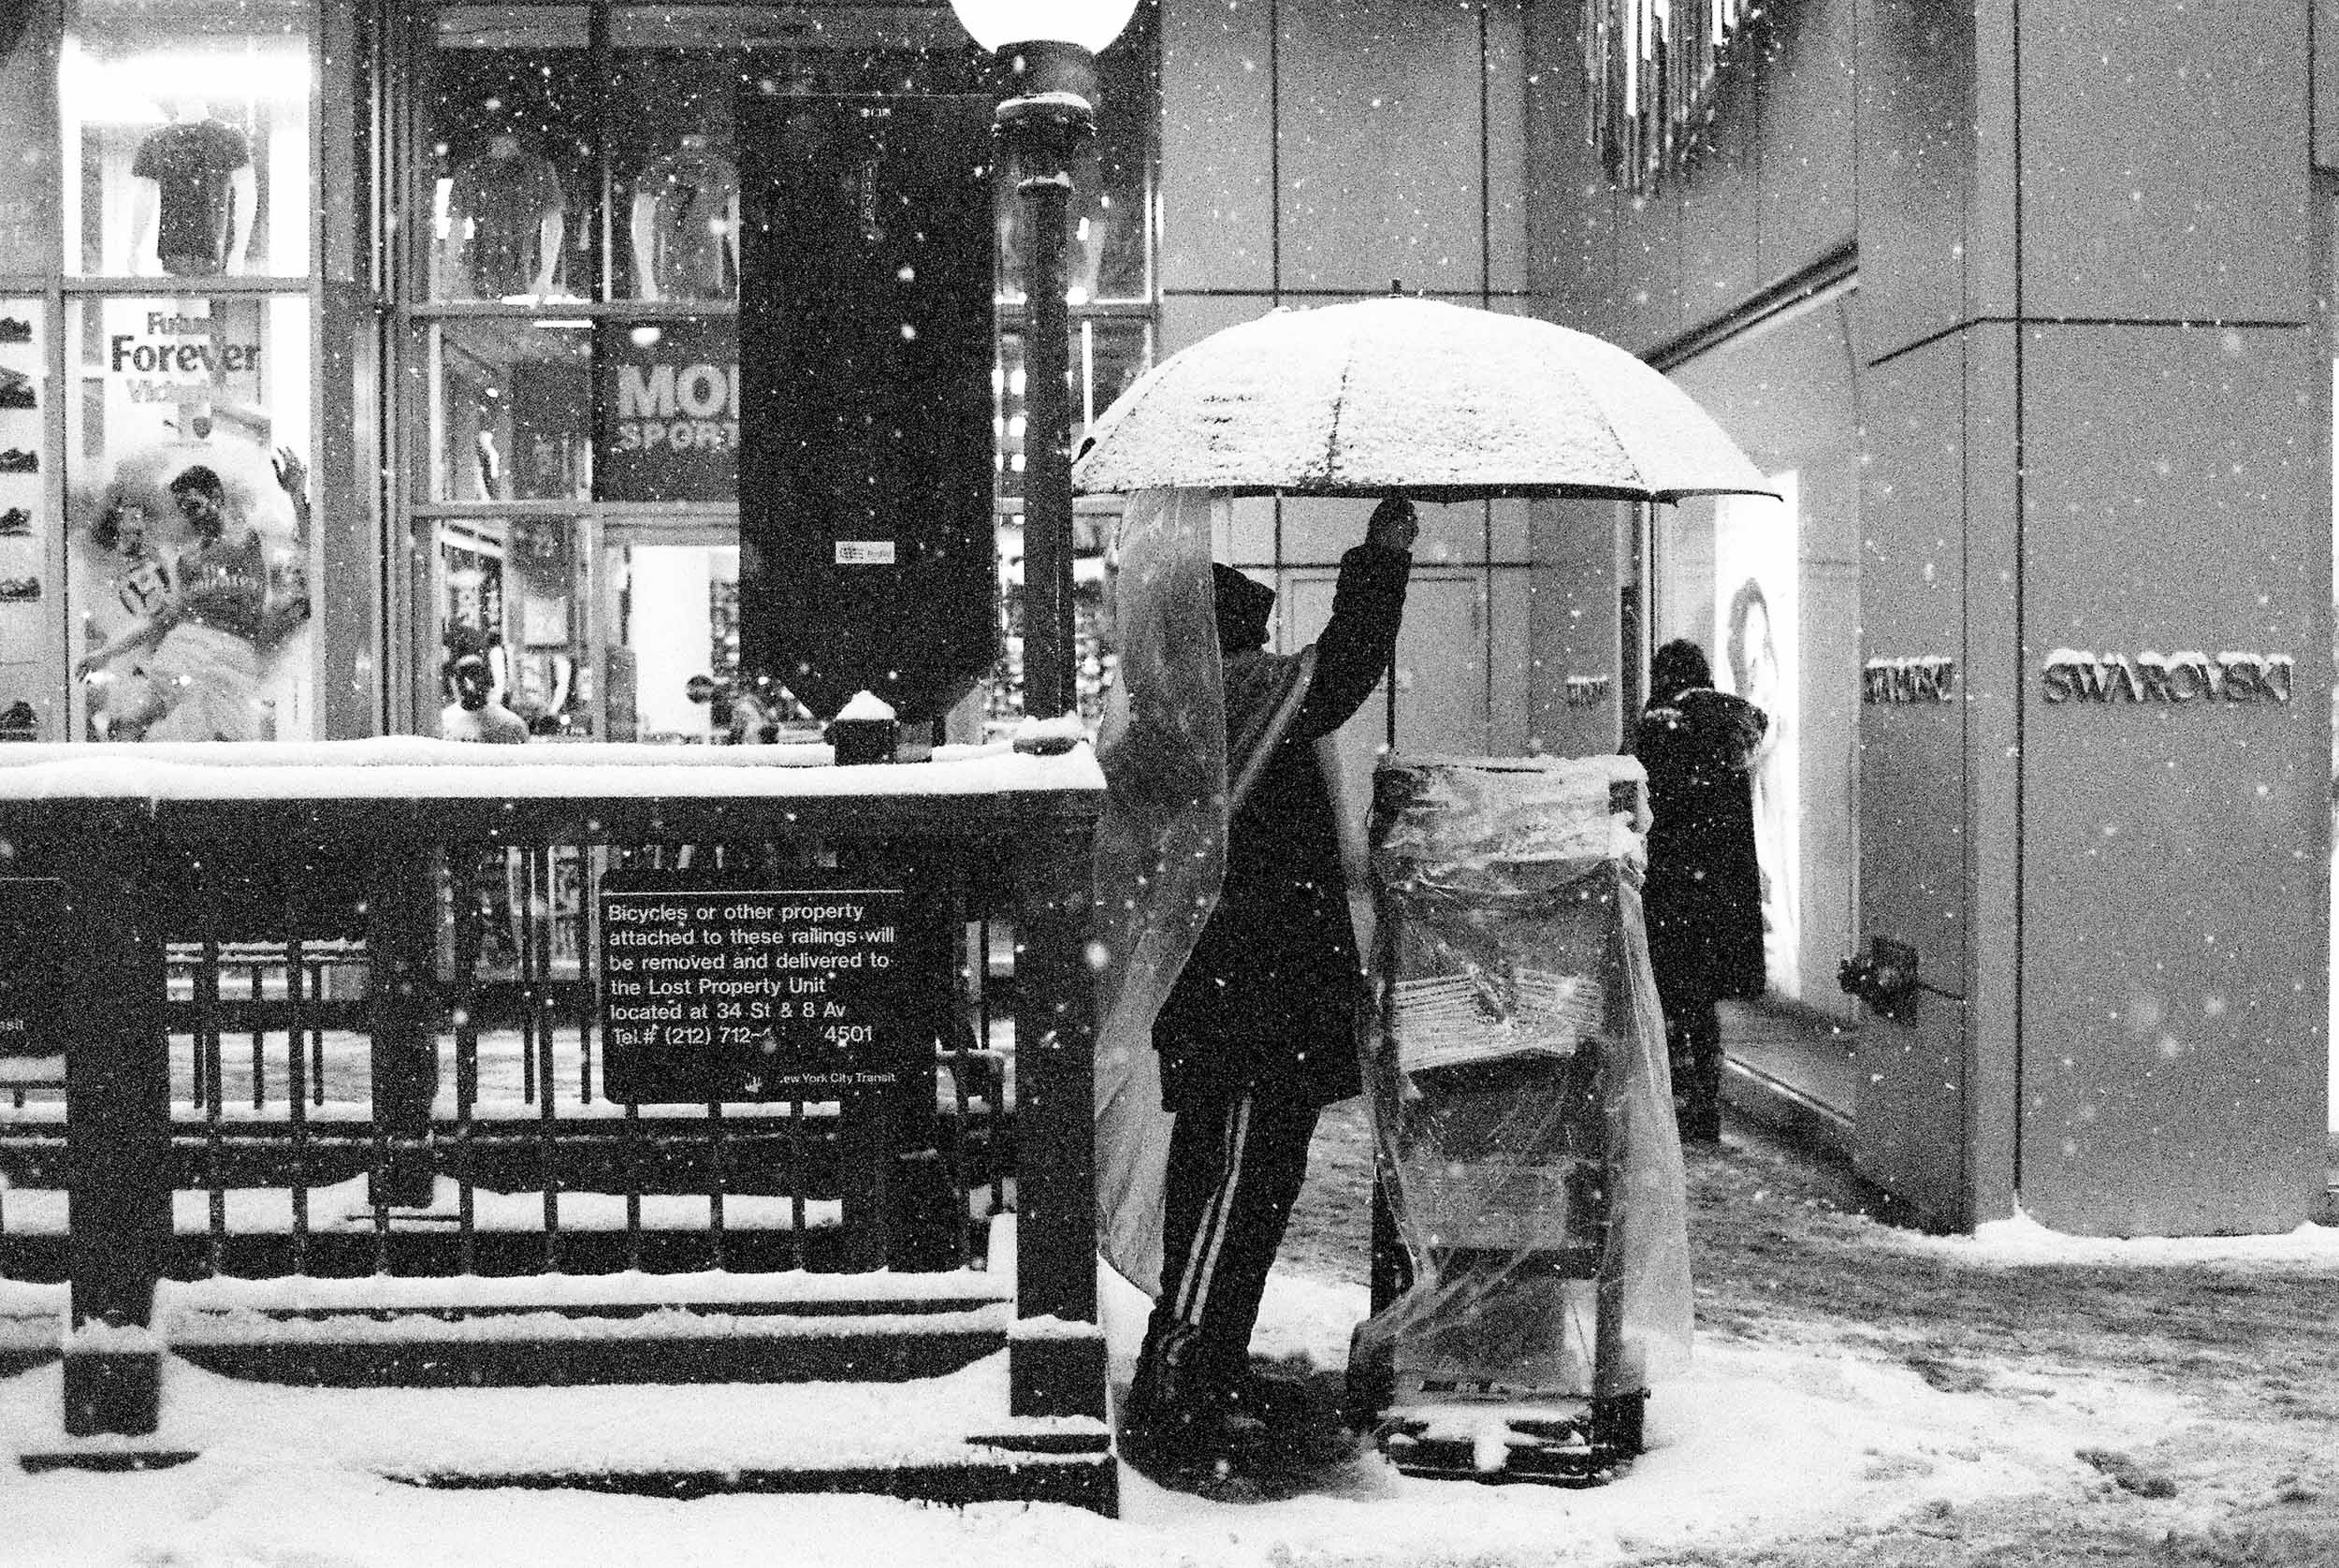 A MAN OPENS HIS UMBRELLA IN A SNOW STORM IN MANHATTAN NEW YORK 